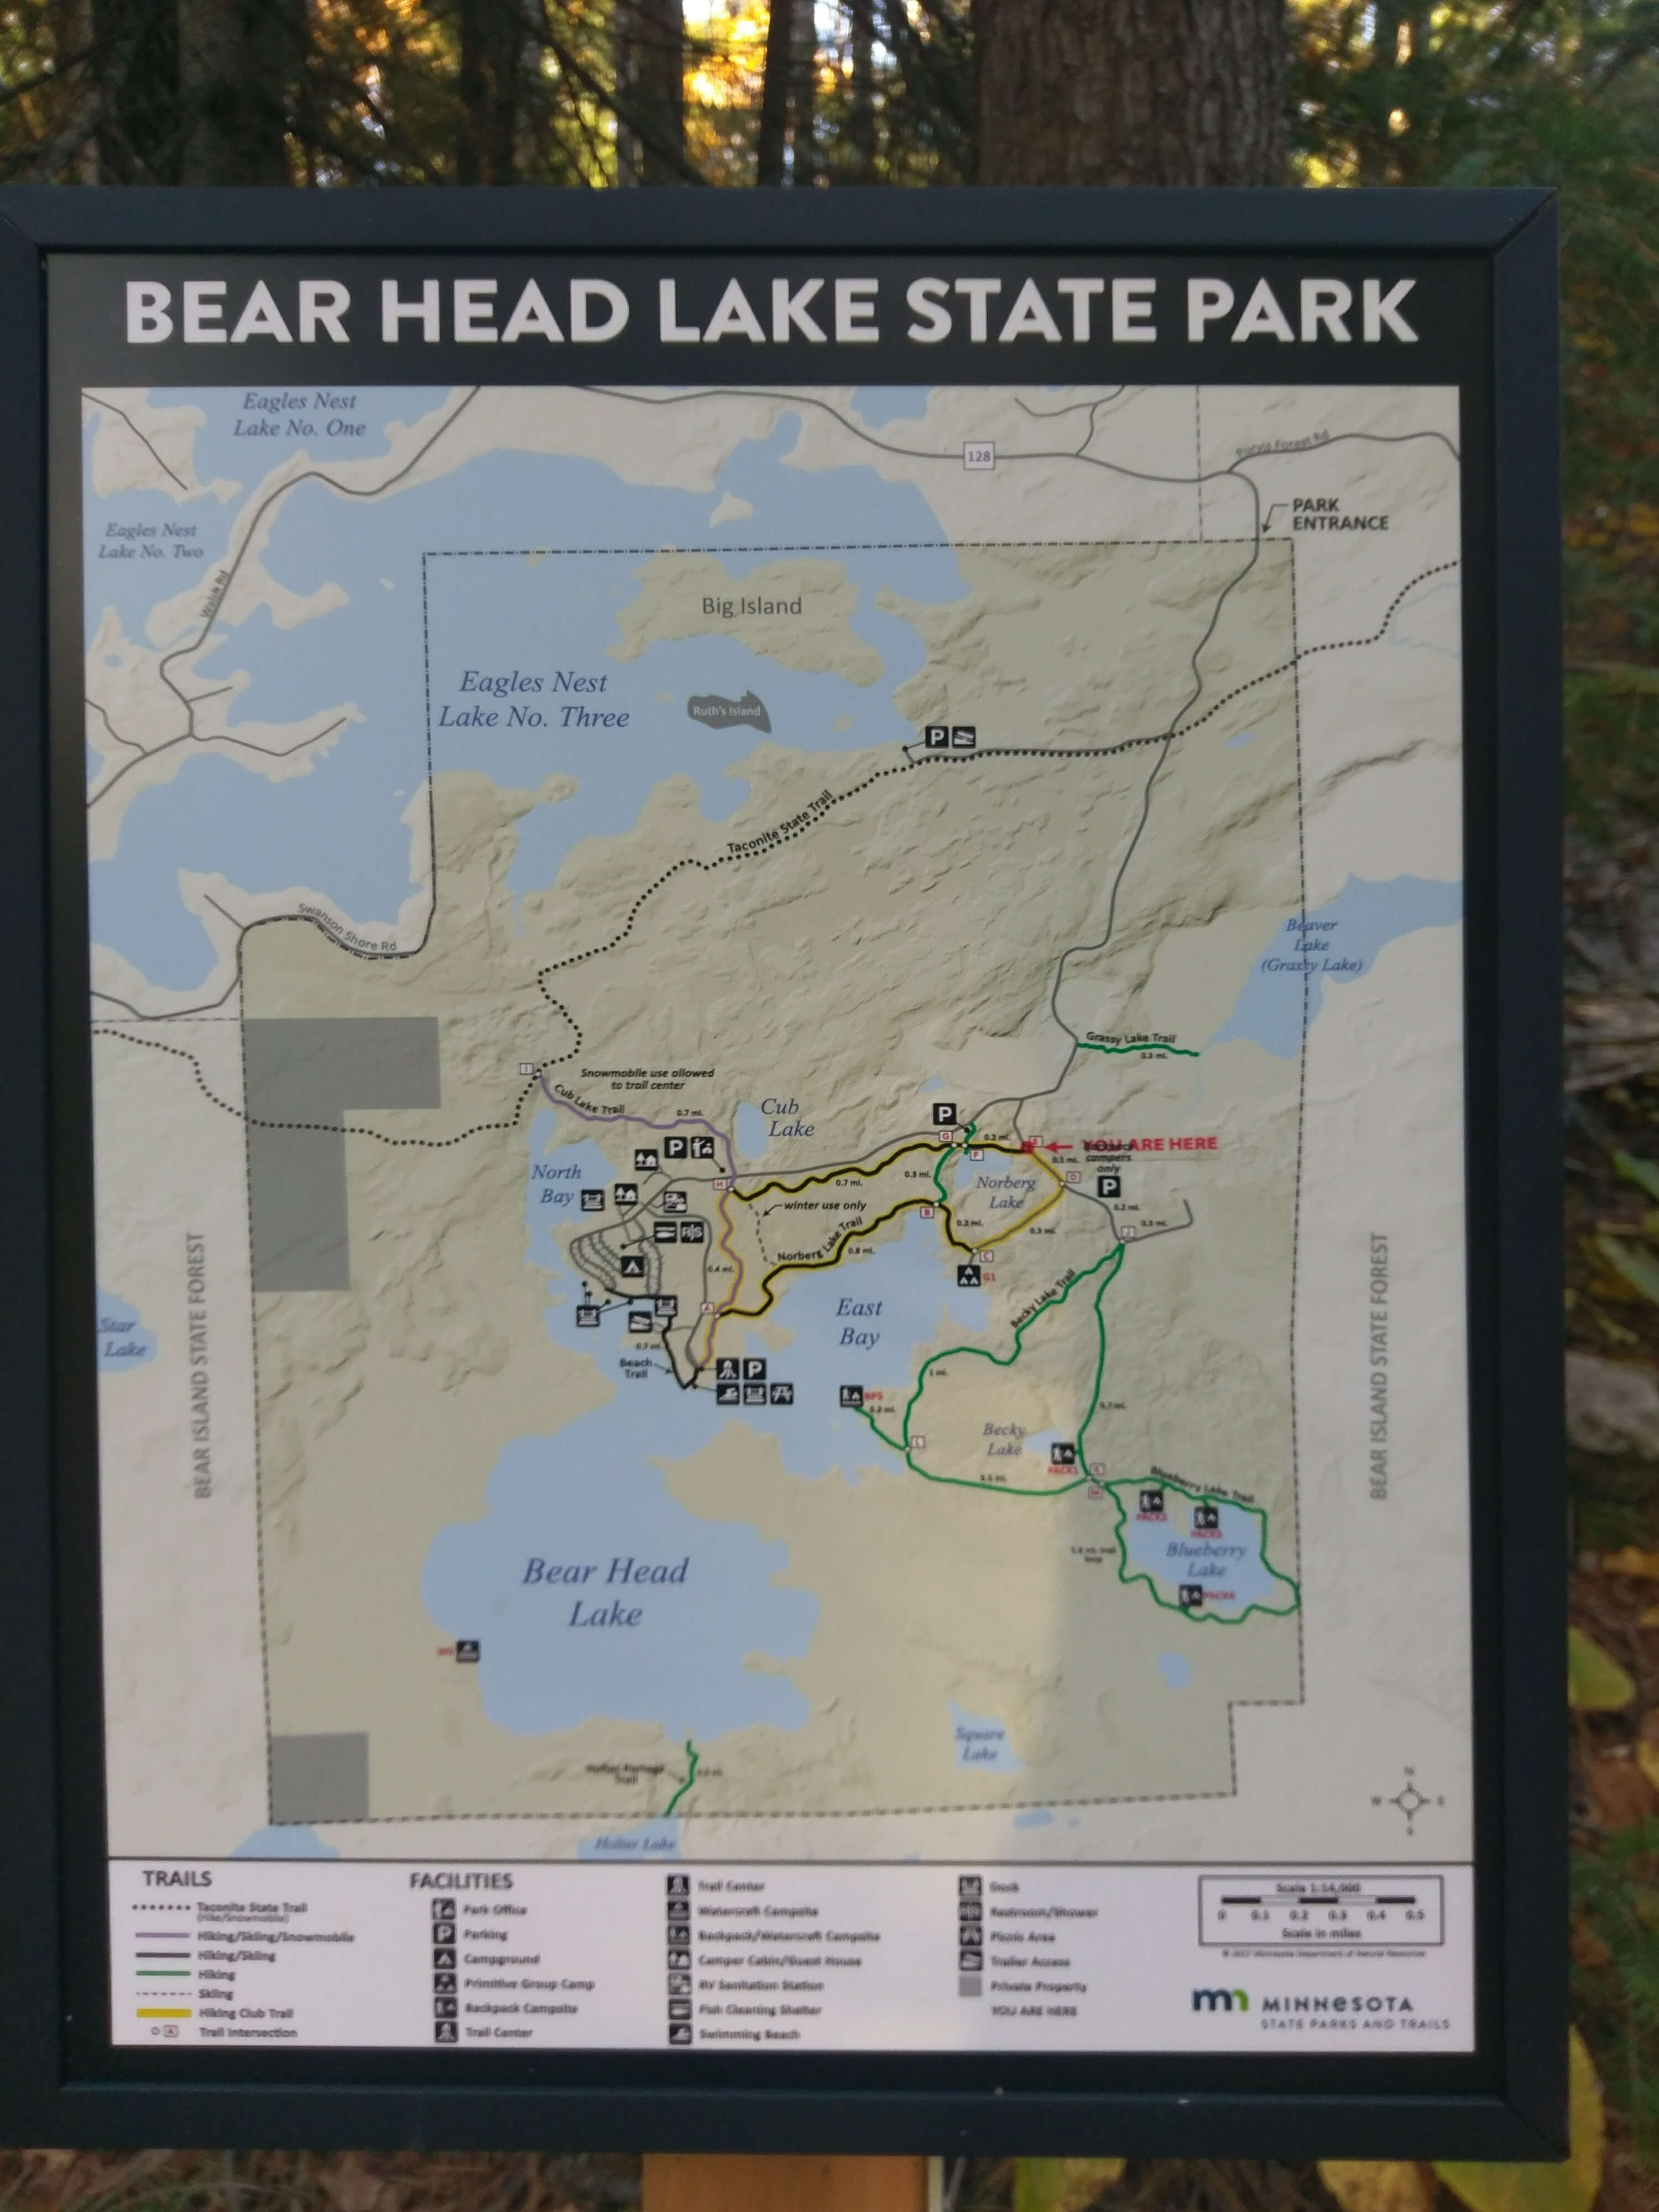 My location shown on an old fashioned sign in Bear Head Lake State Park